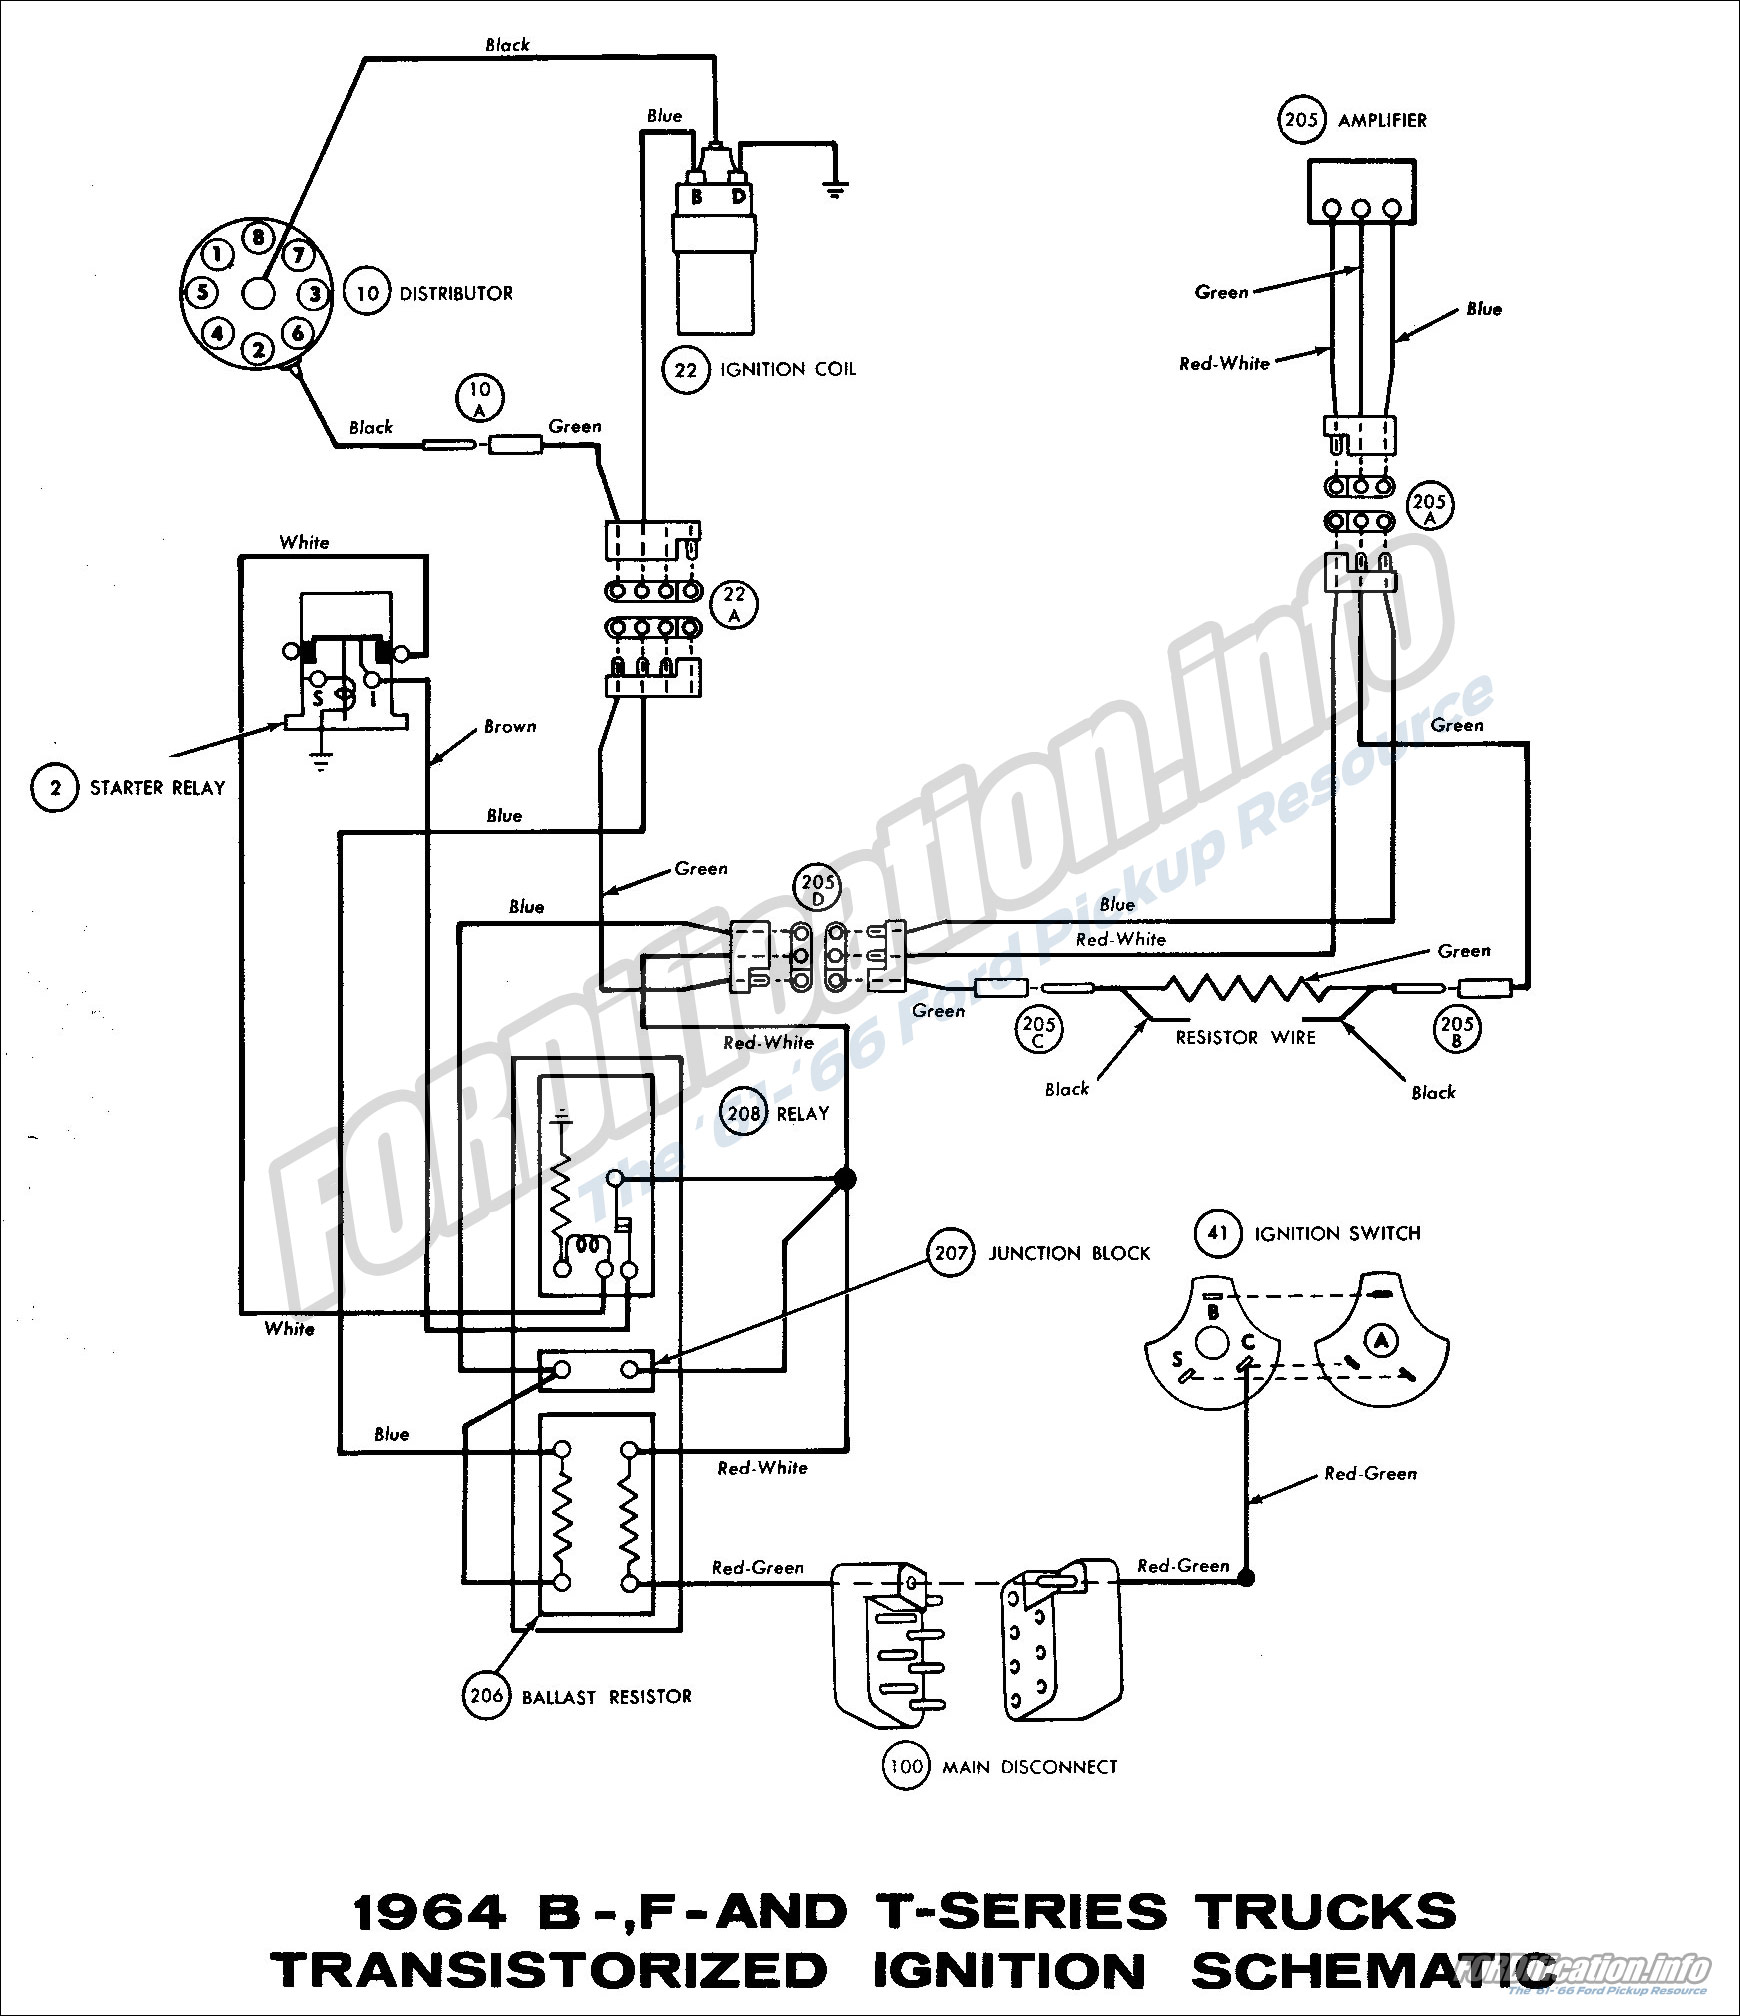 1964 Ford Truck Wiring Diagrams - FORDification.info - The ... ford truck ignition wiring 